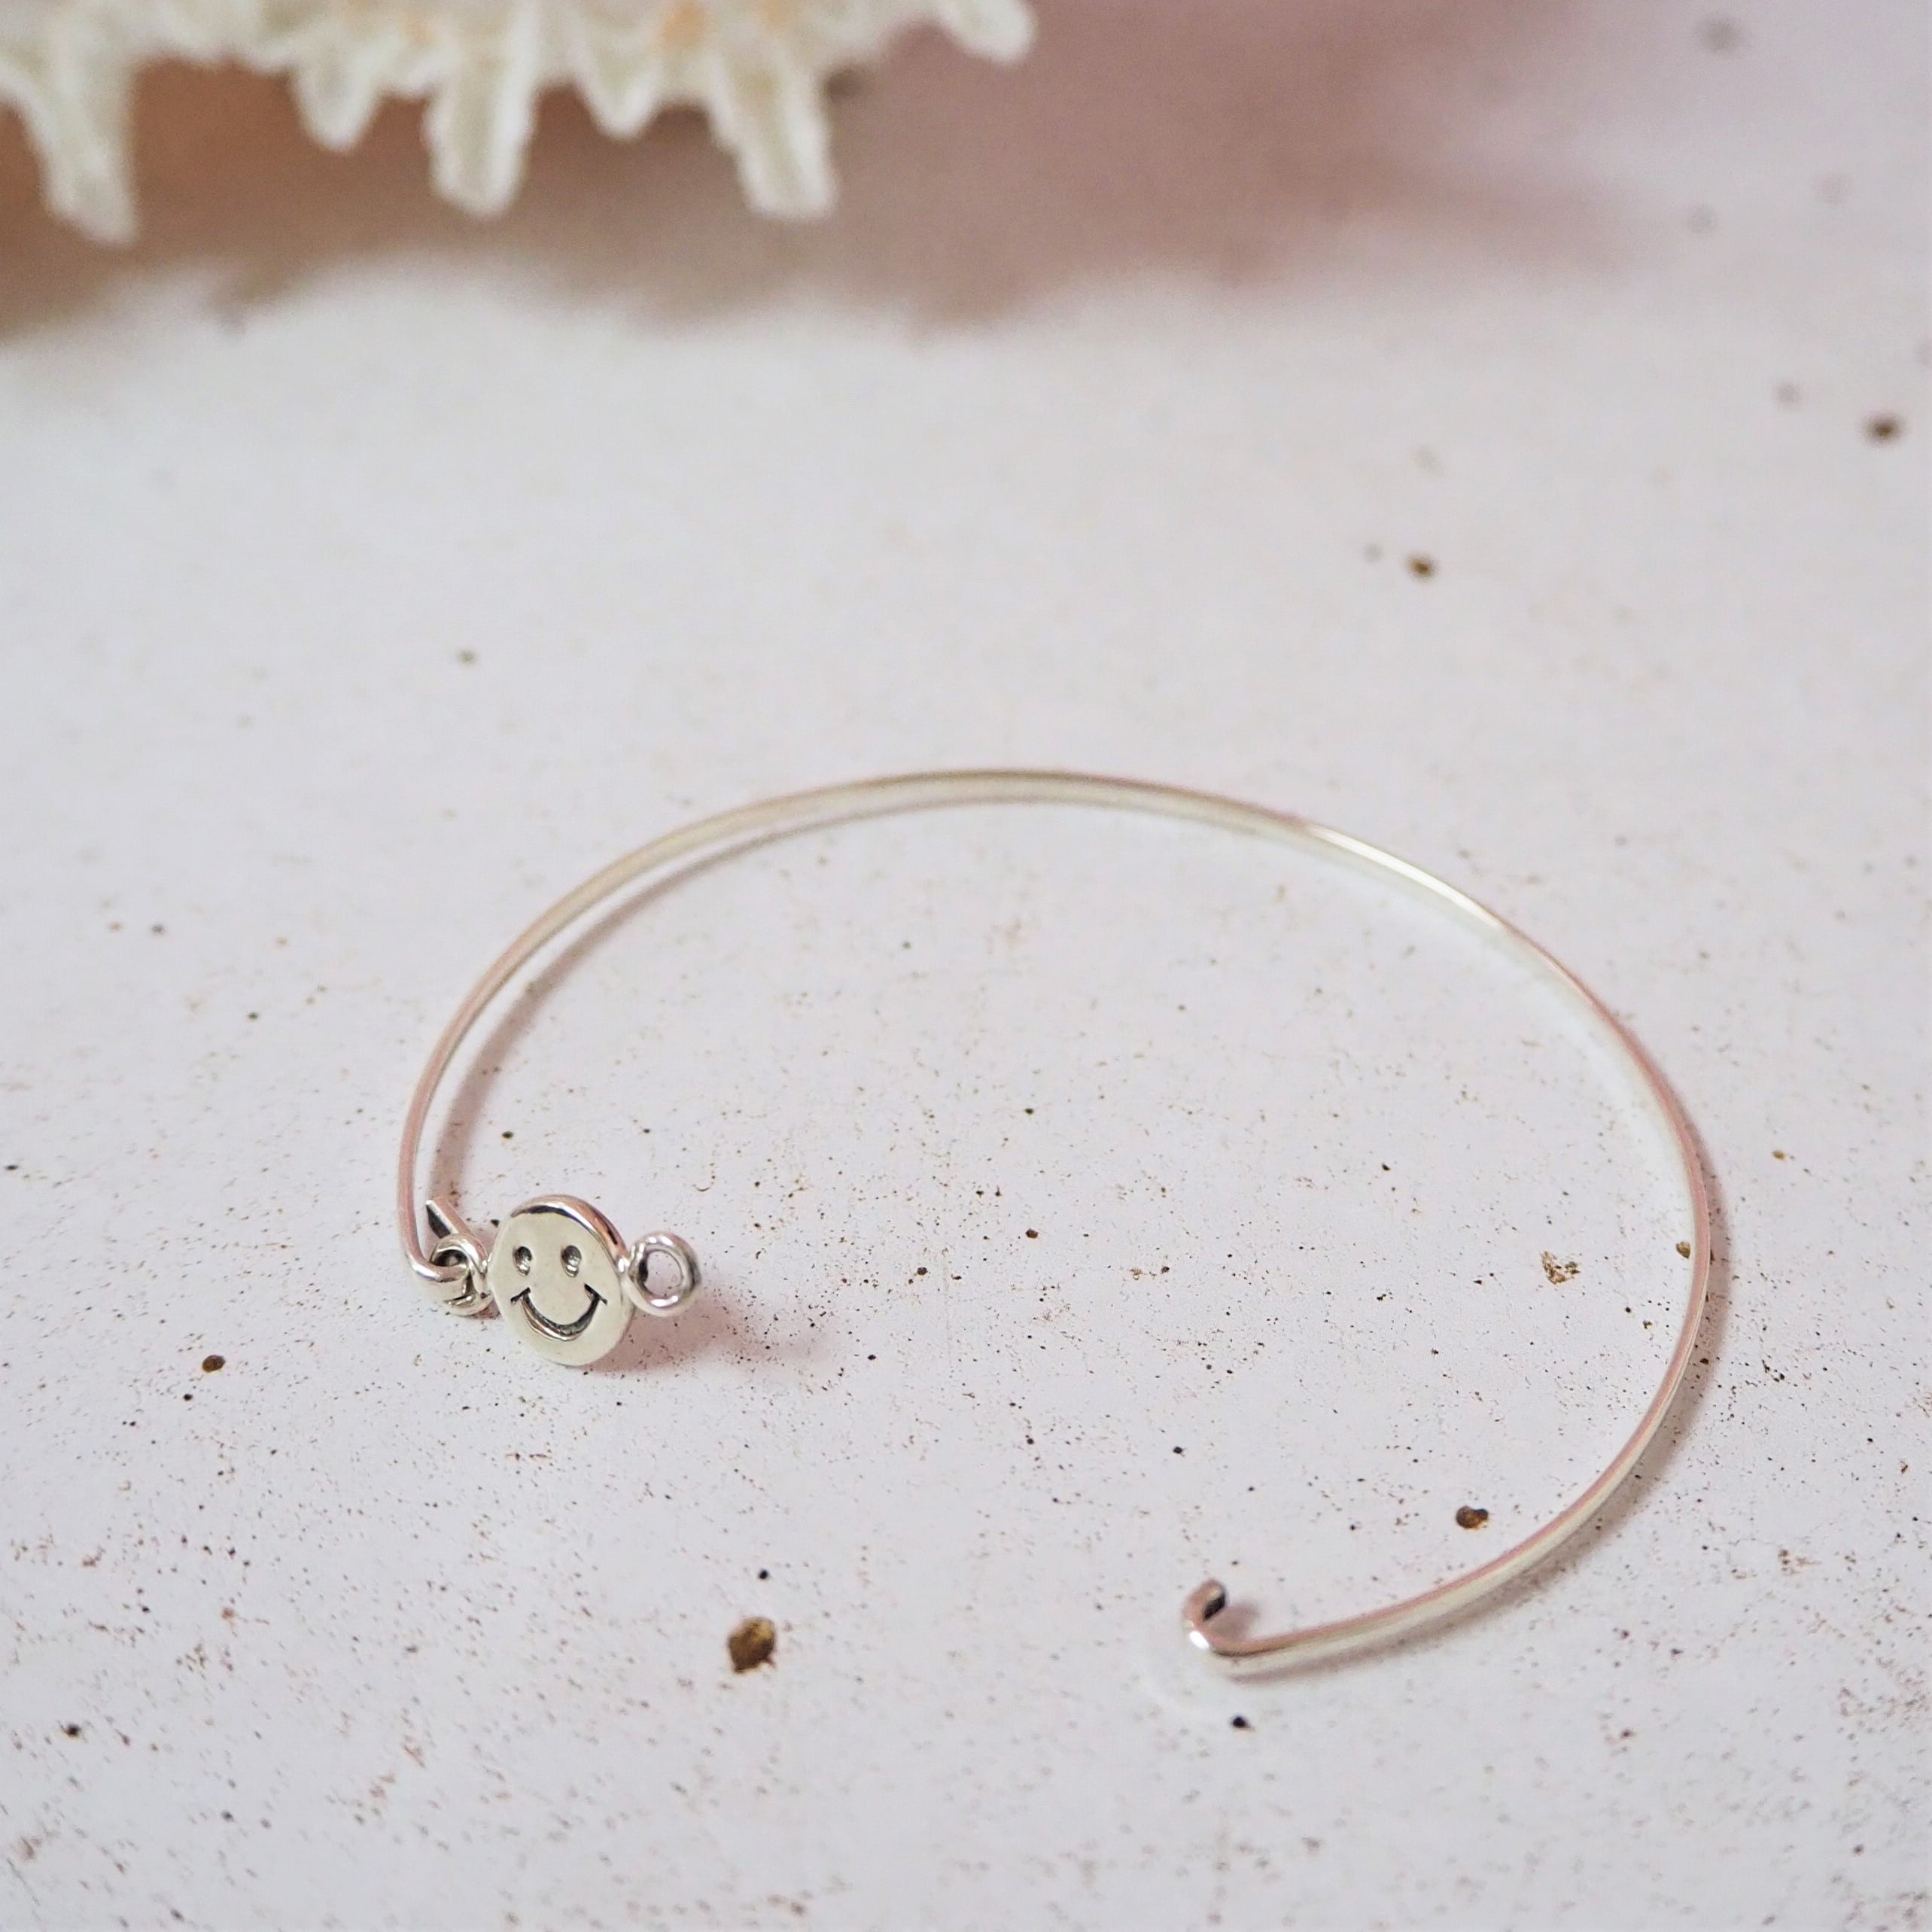 Smile Hoop Silver Bangle《SILVER925》18380428(S1) | SEARCH. powered by BASE